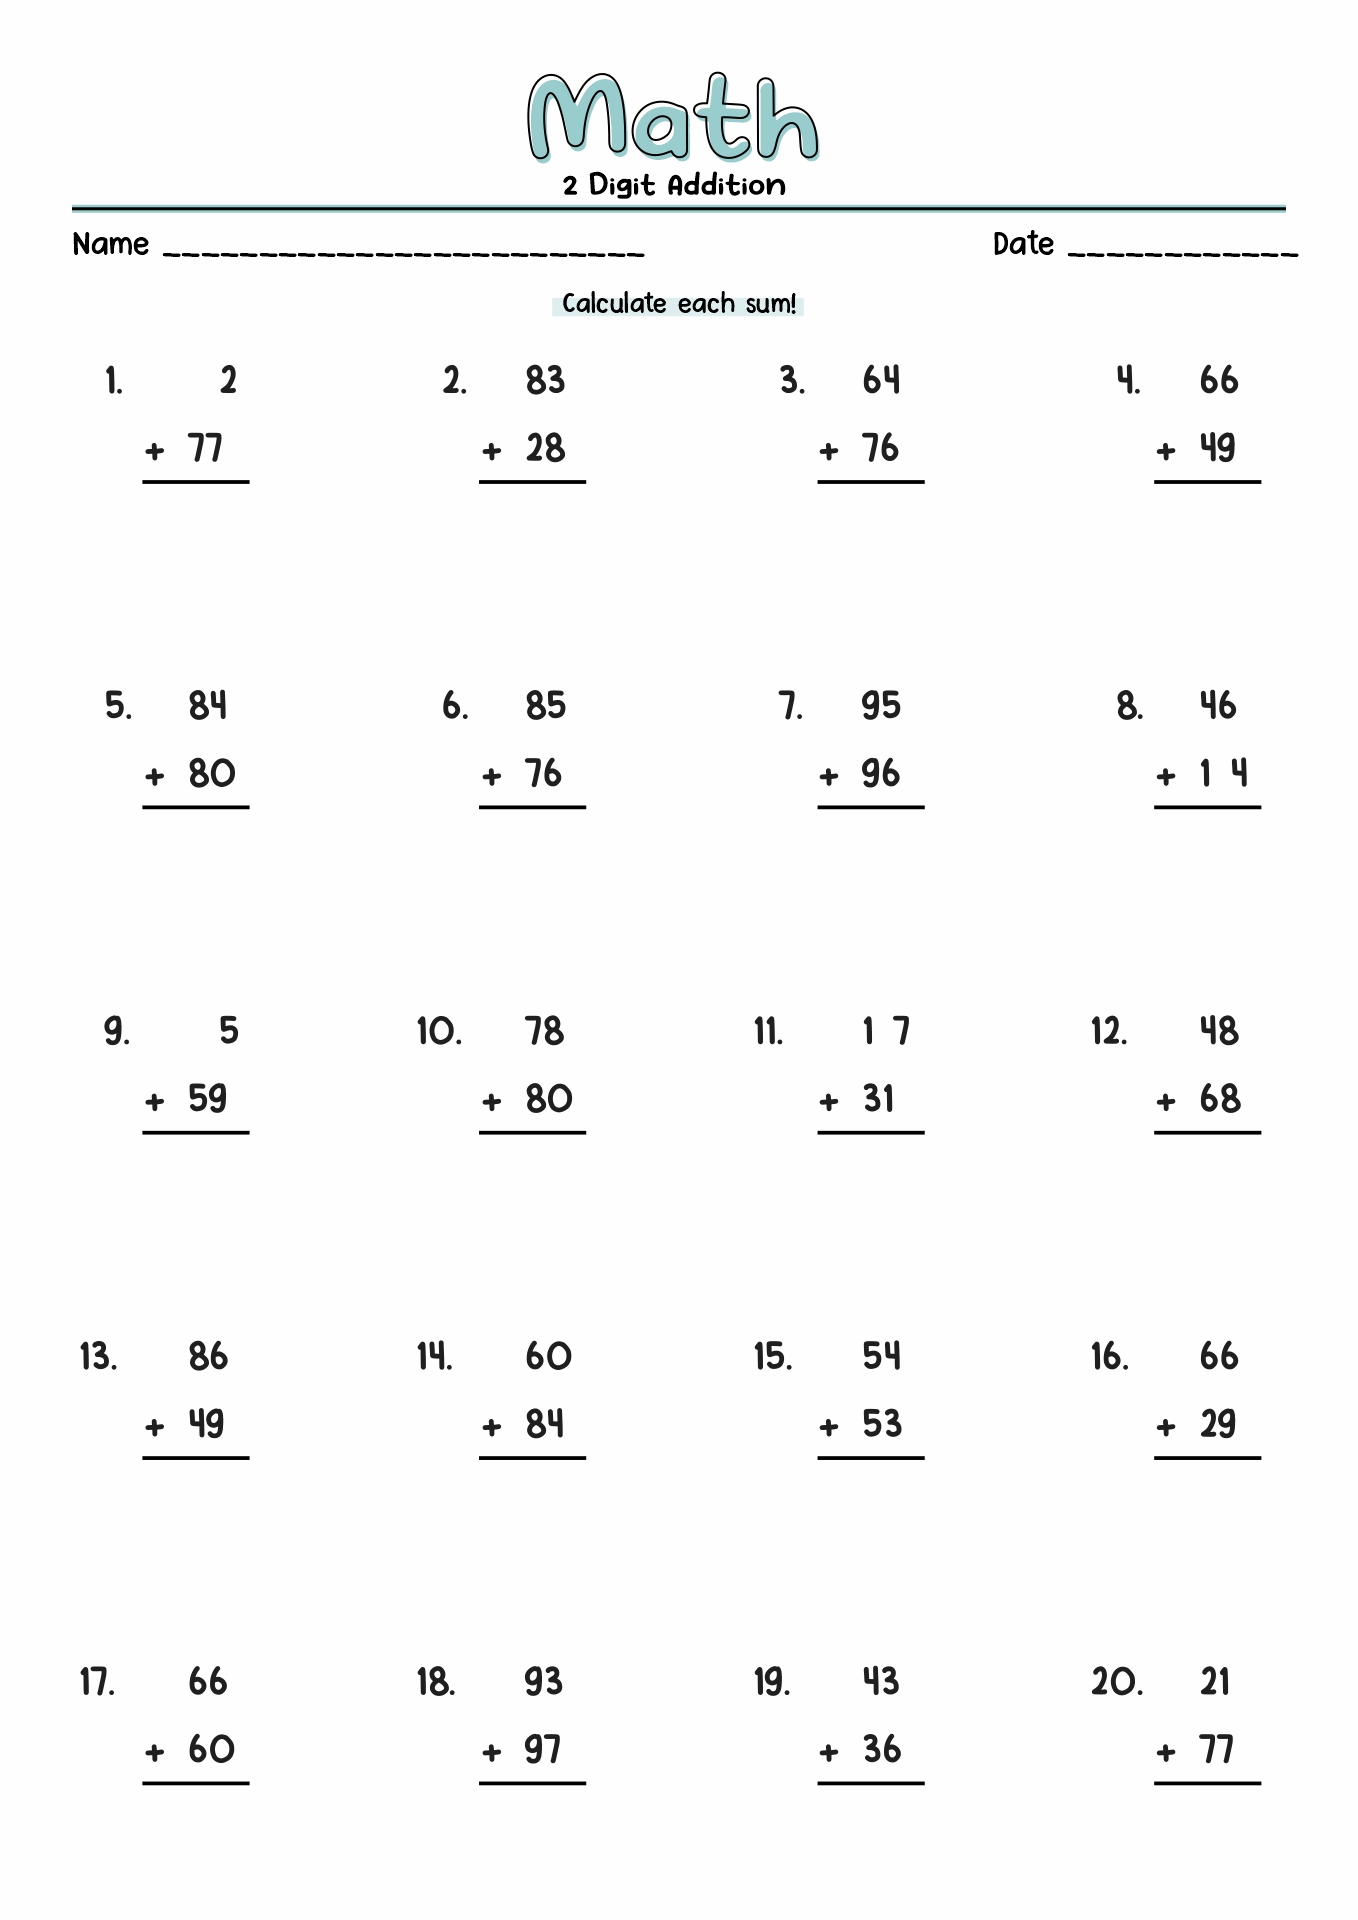 Adding Two Digit Numbers Worksheet Image